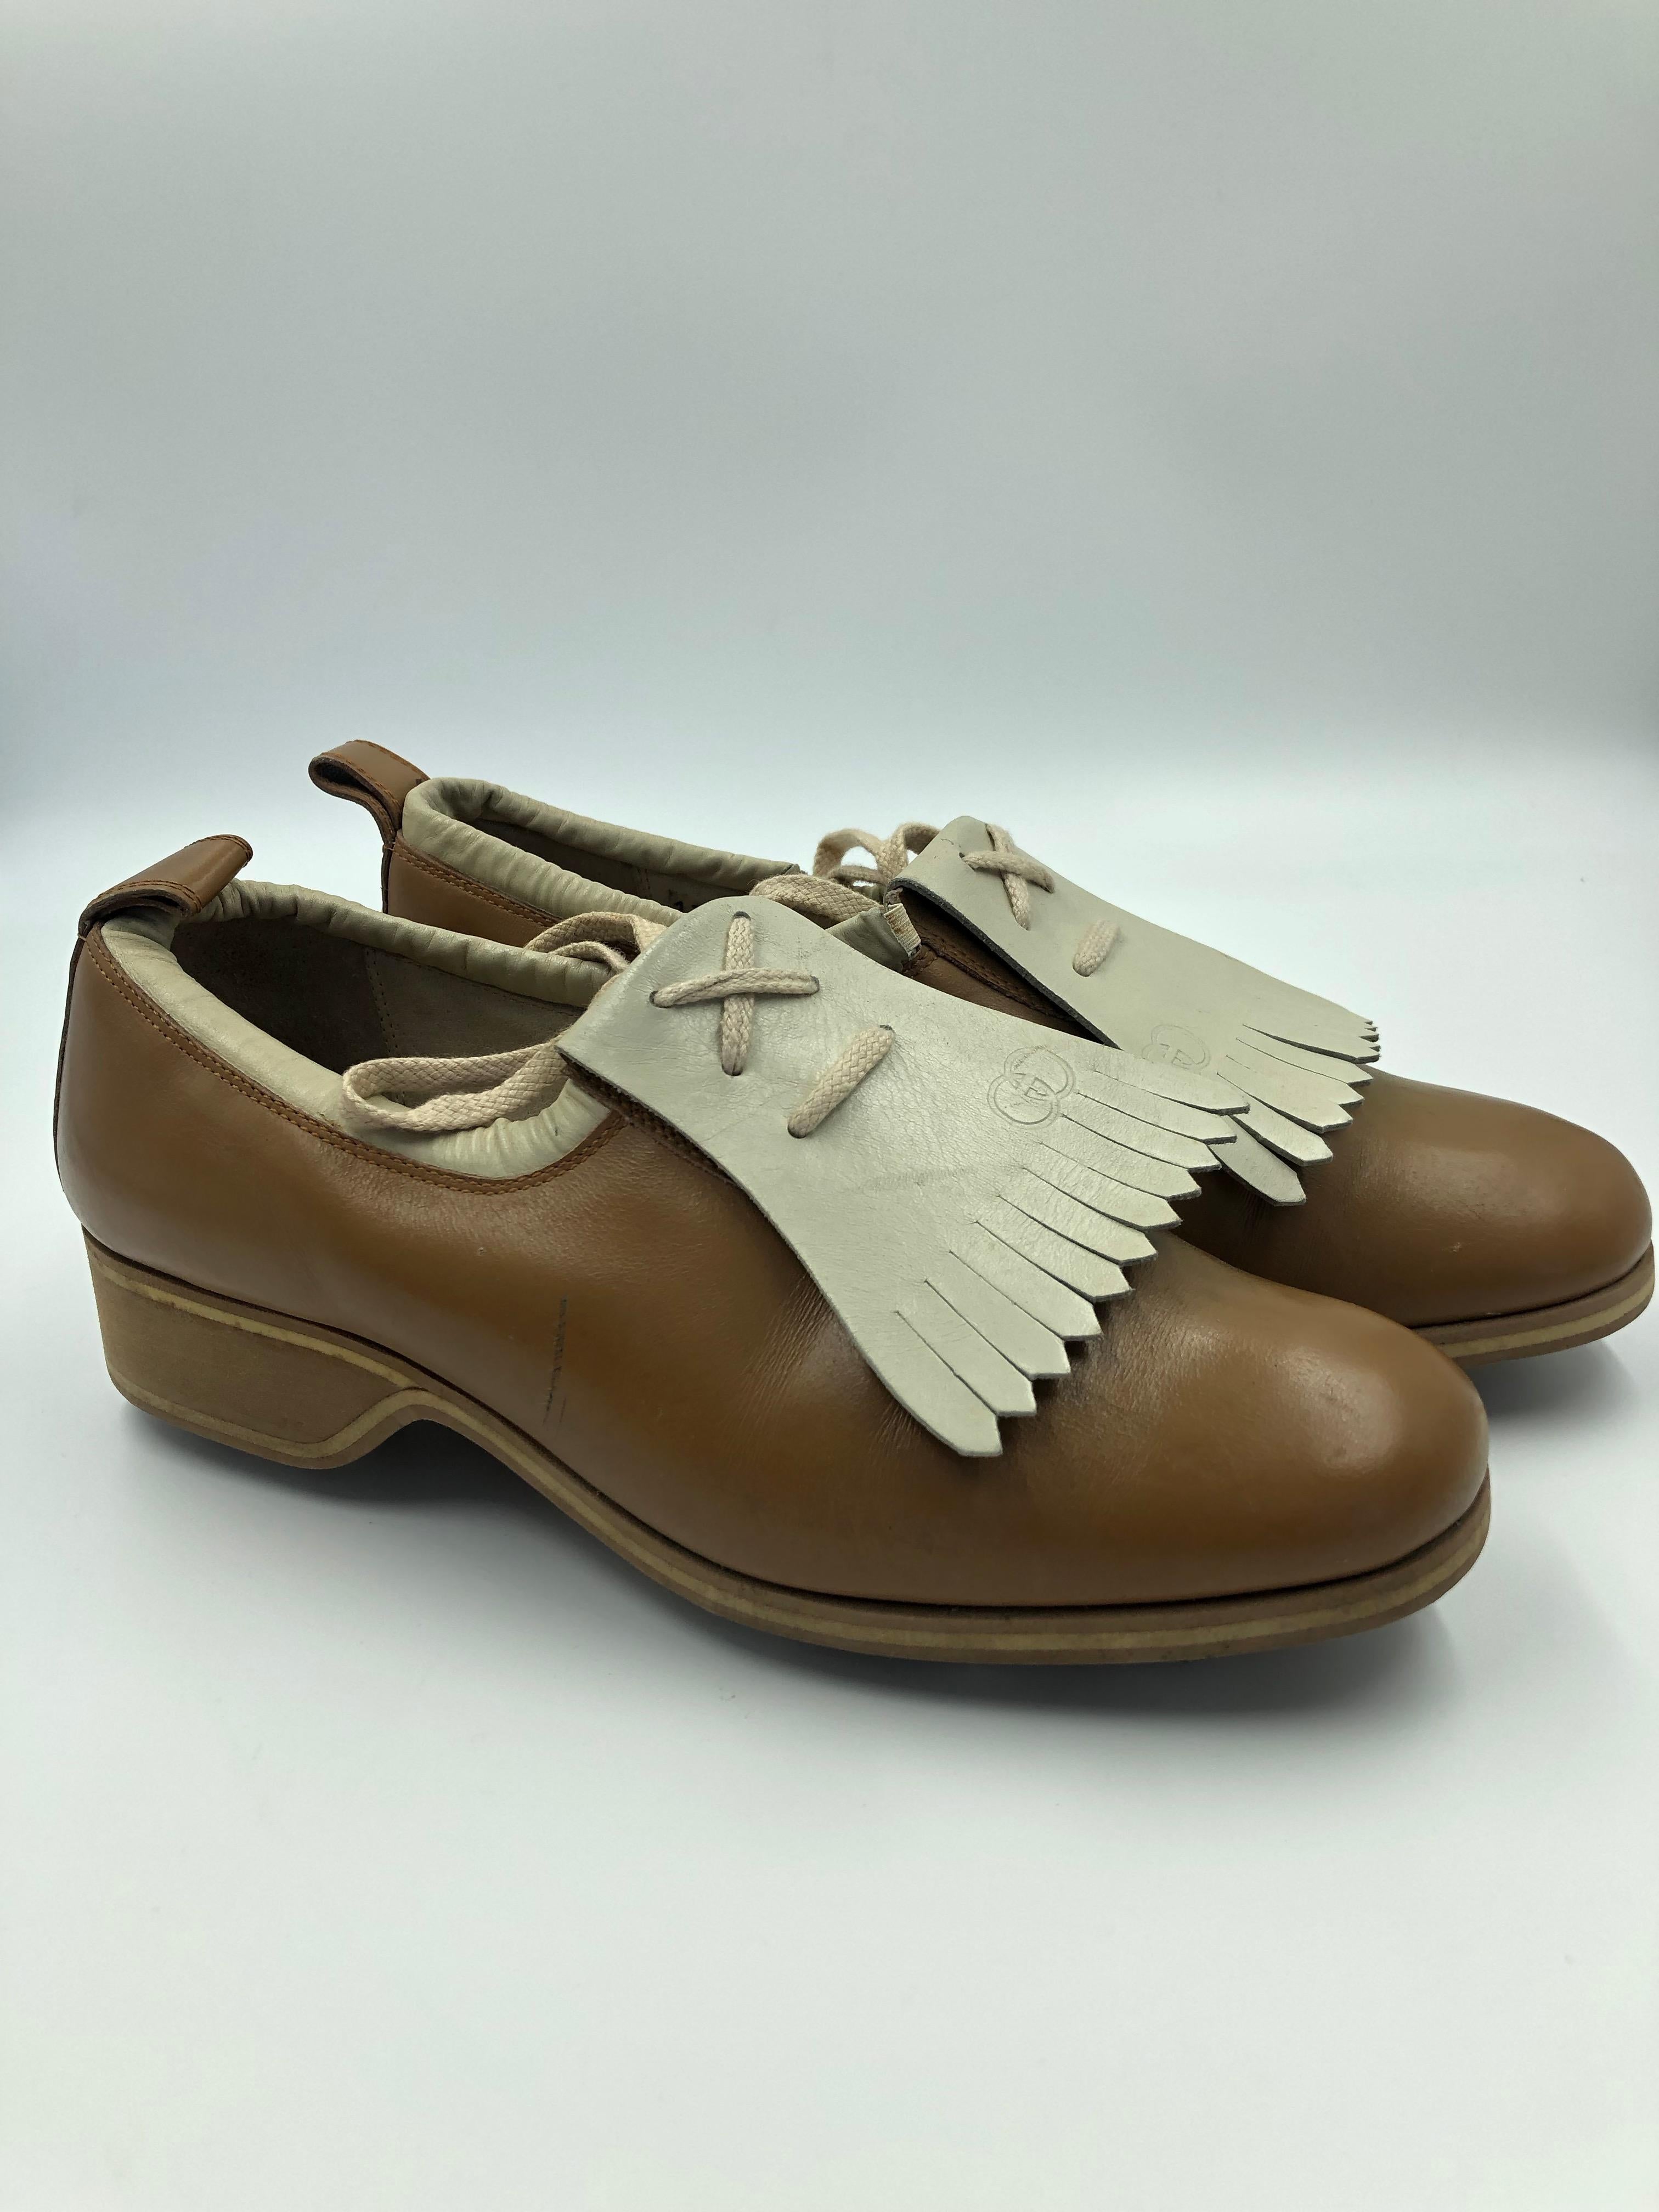 Gucci Collectors Vintage Golf Shoe with Cleats Tan and Cream 3